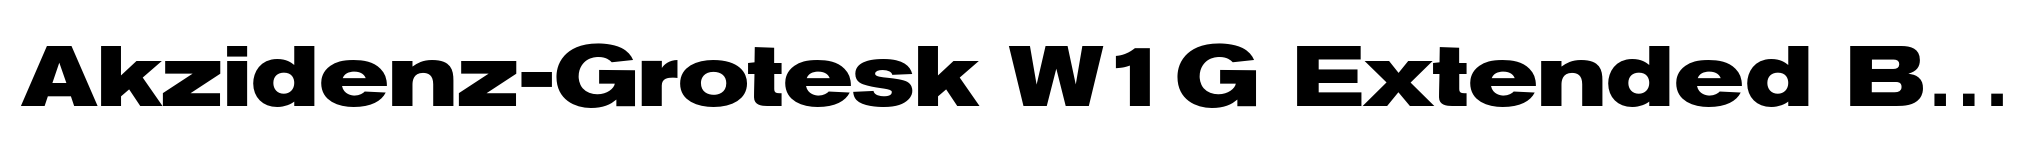 Akzidenz-Grotesk W1G Extended Bold image